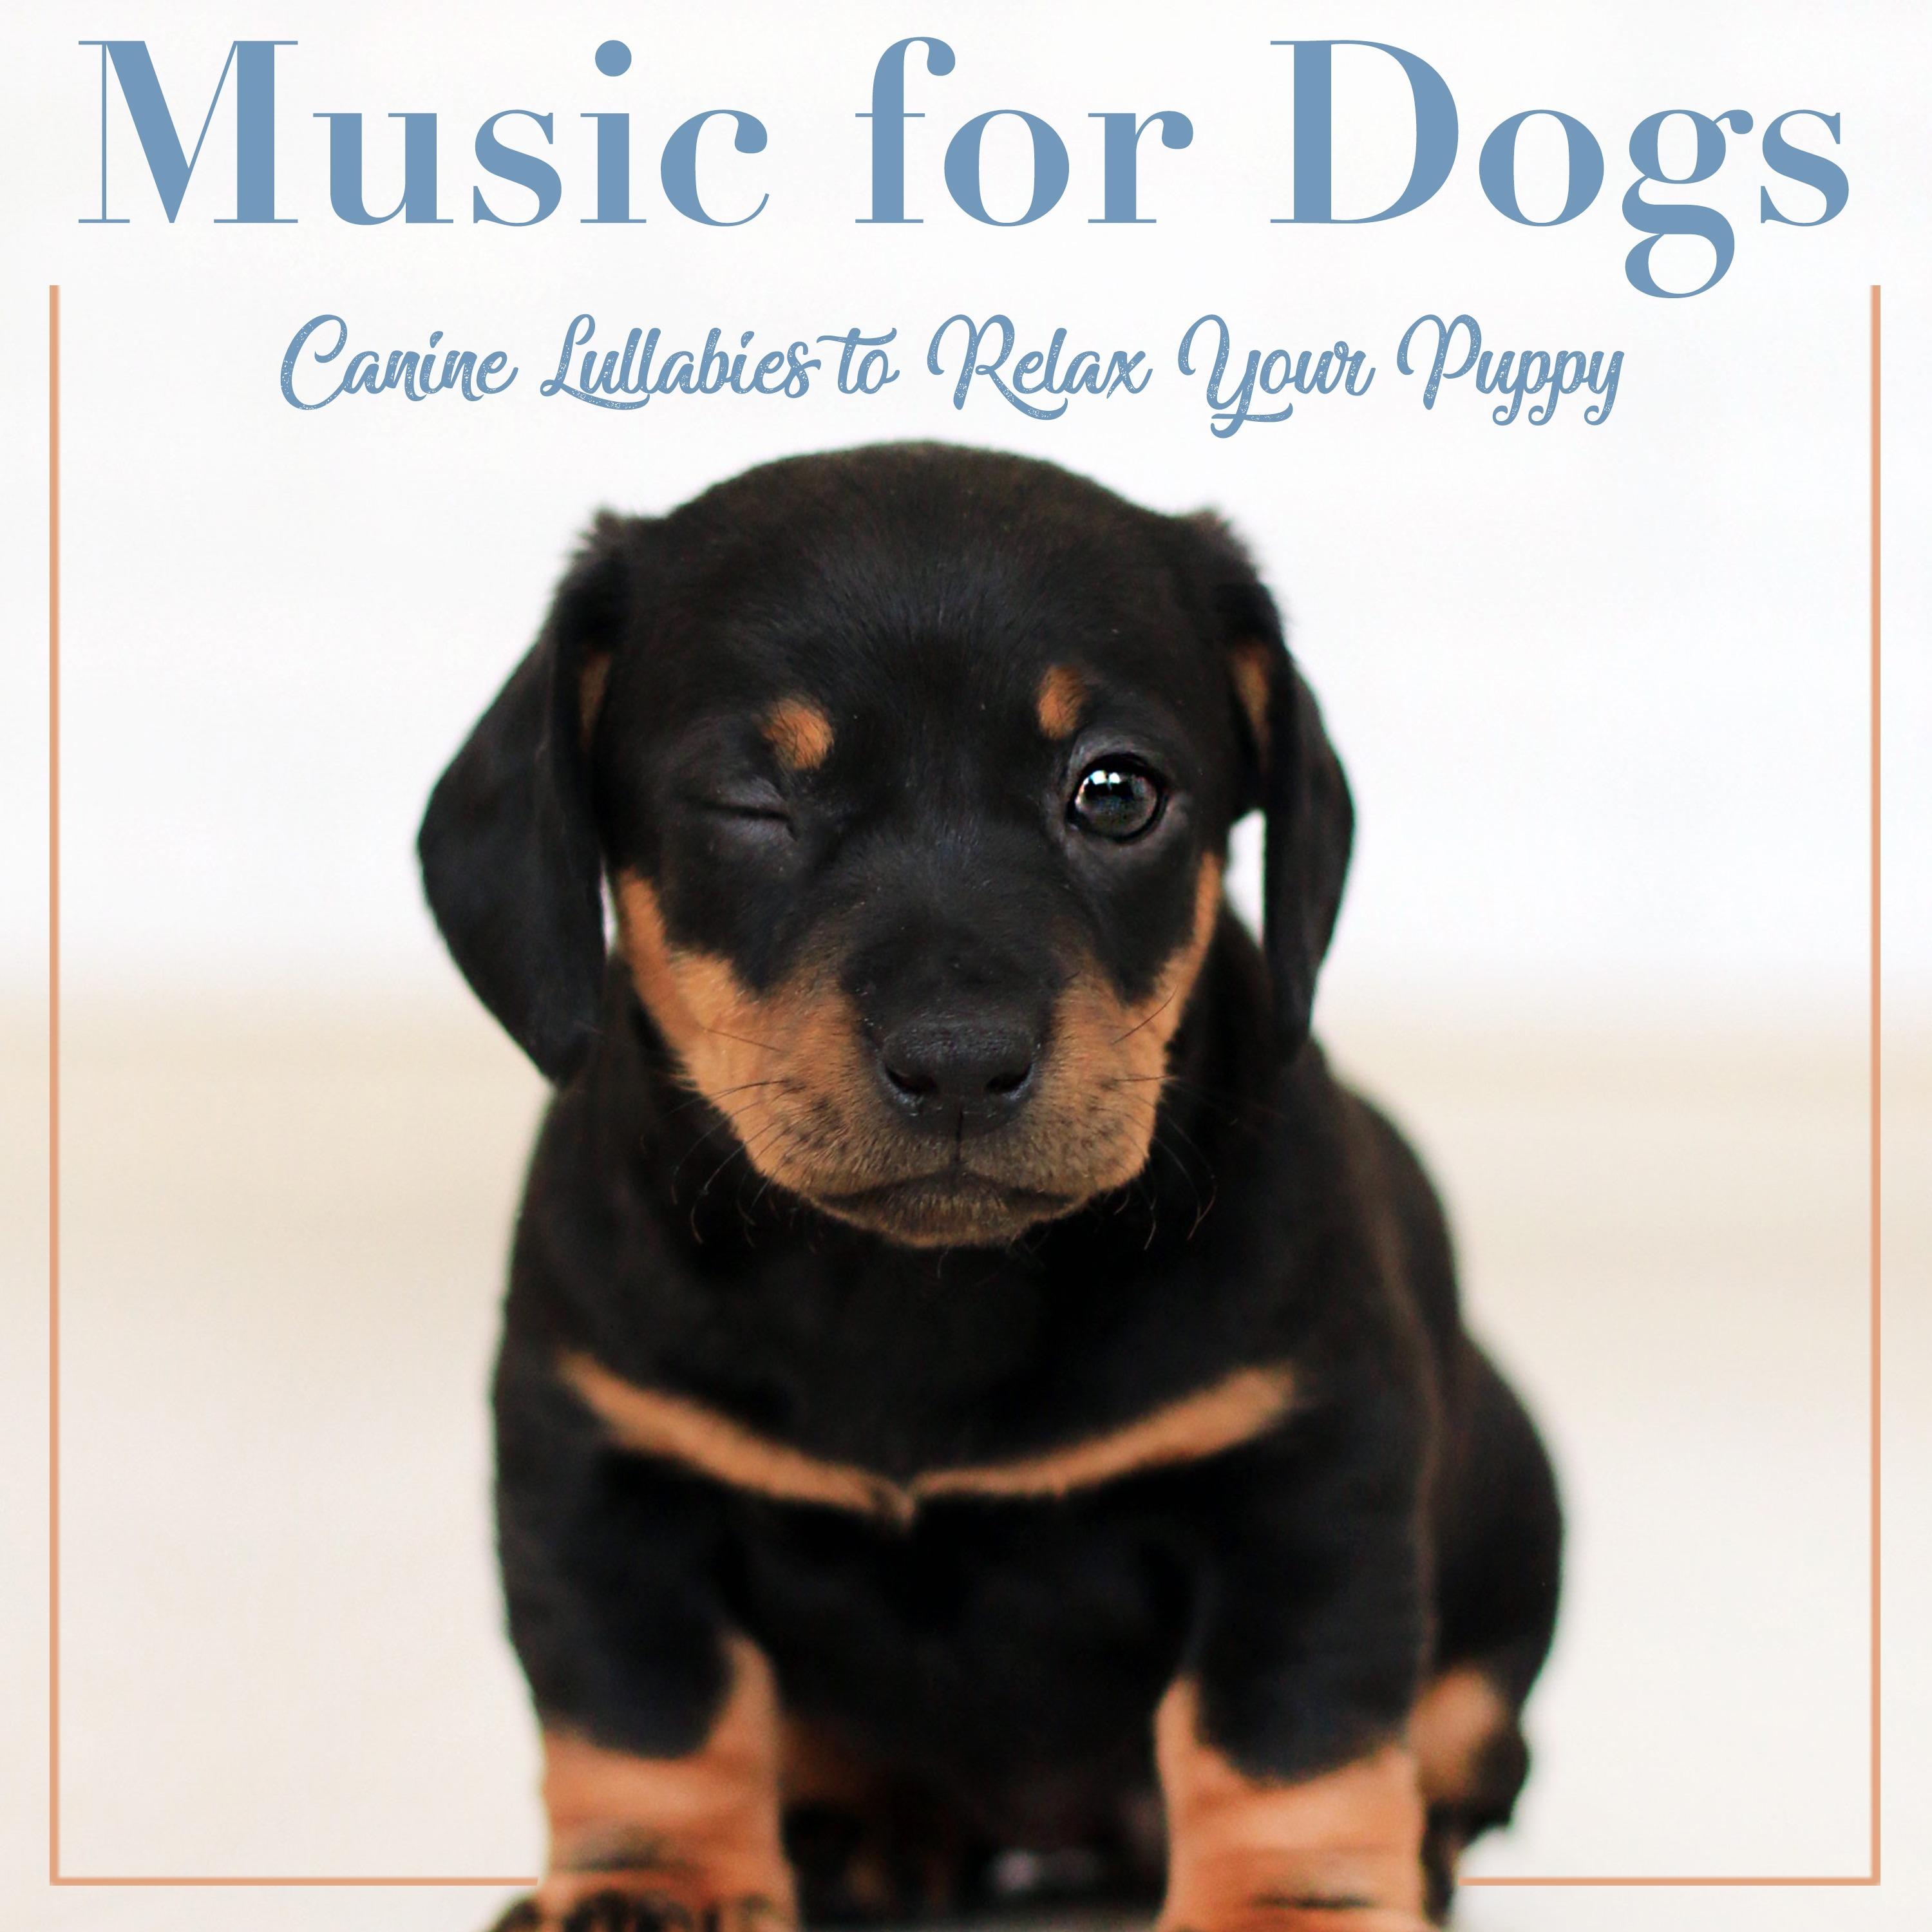 Music for Dogs: Canine Lullabies to Relax Your Puppy